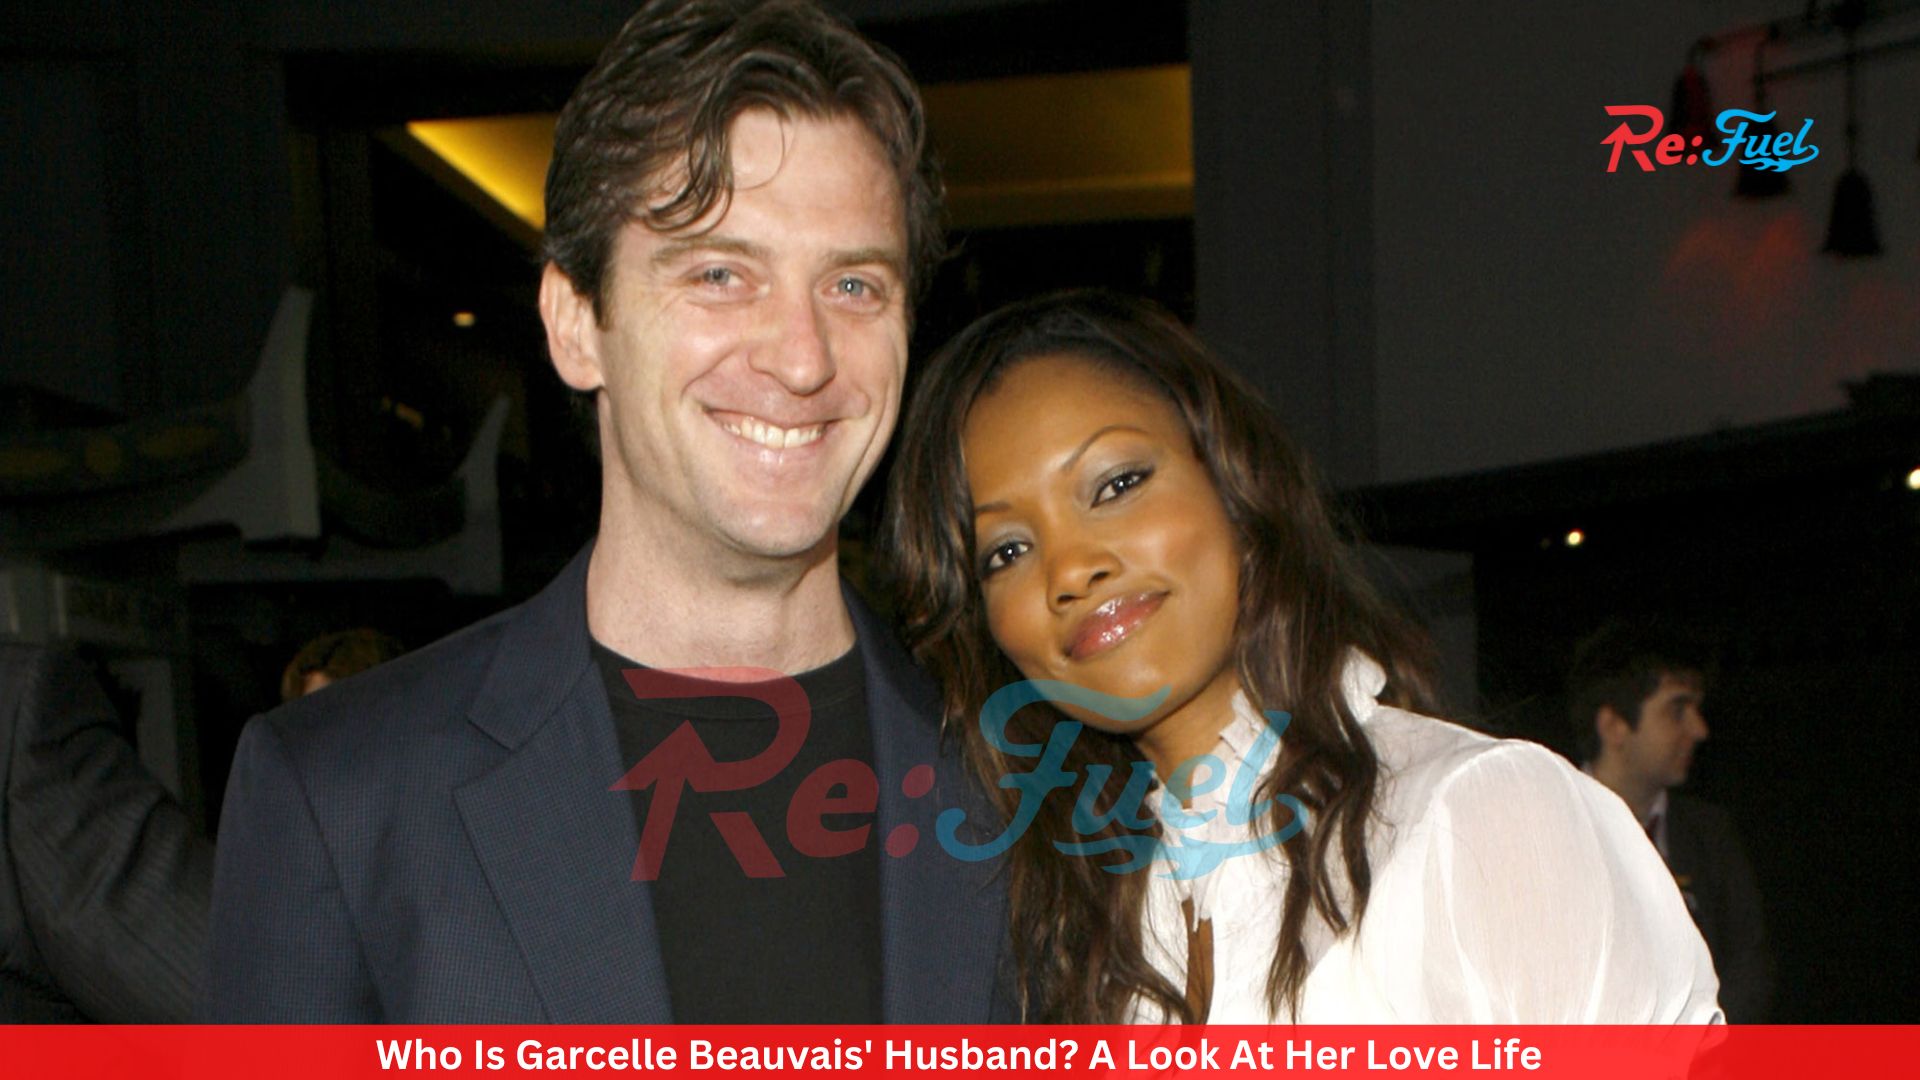 Who Is Garcelle Beauvais' Husband? A Look At Her Love Life